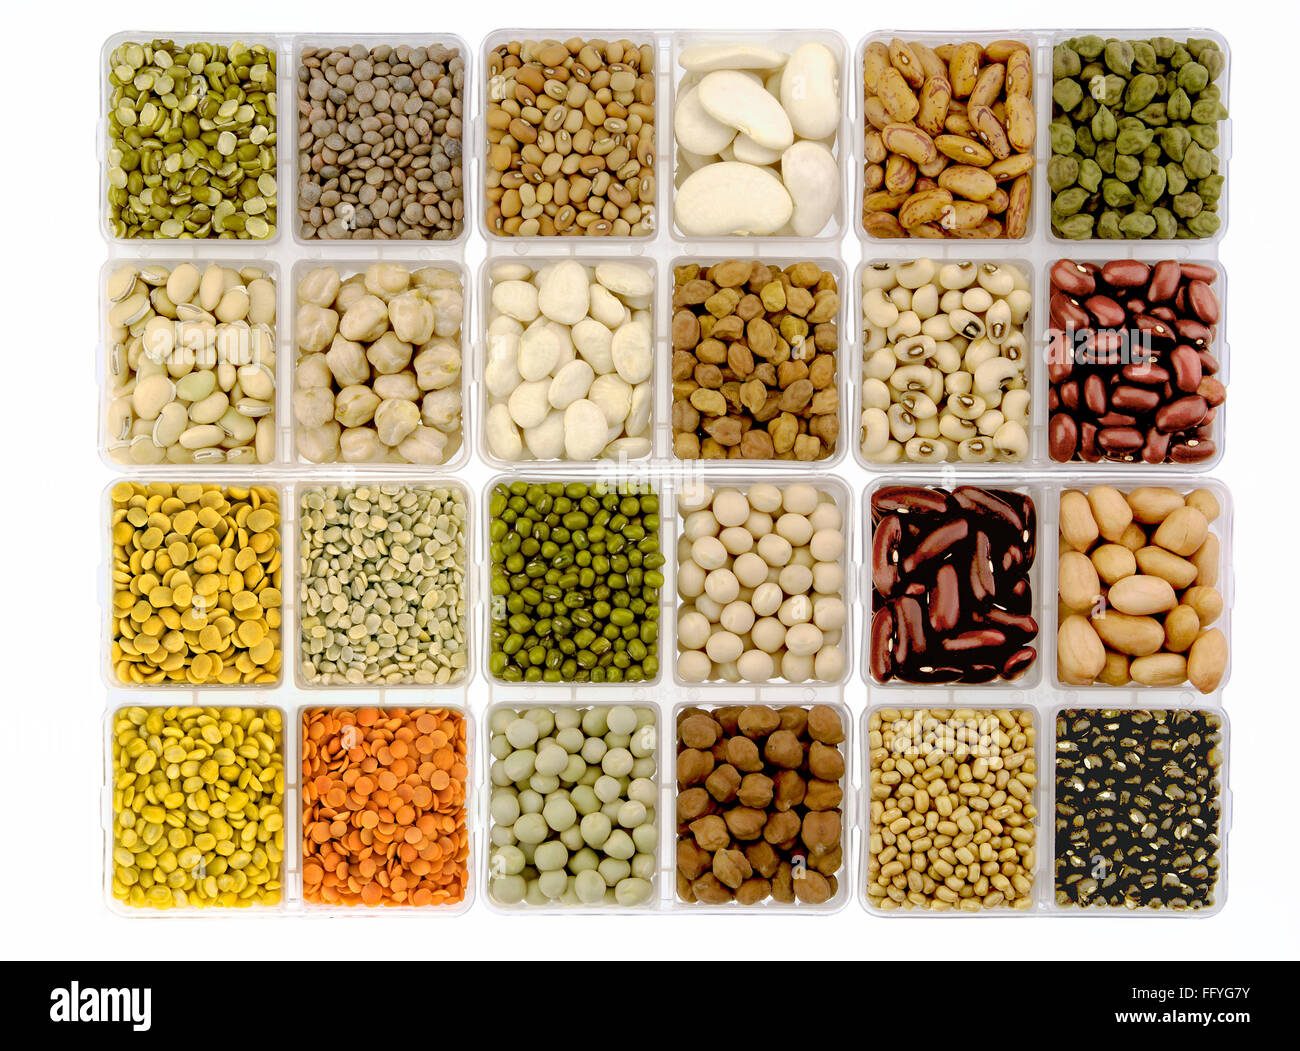 Lentils pulses and beans in square dish ; India Stock Photo